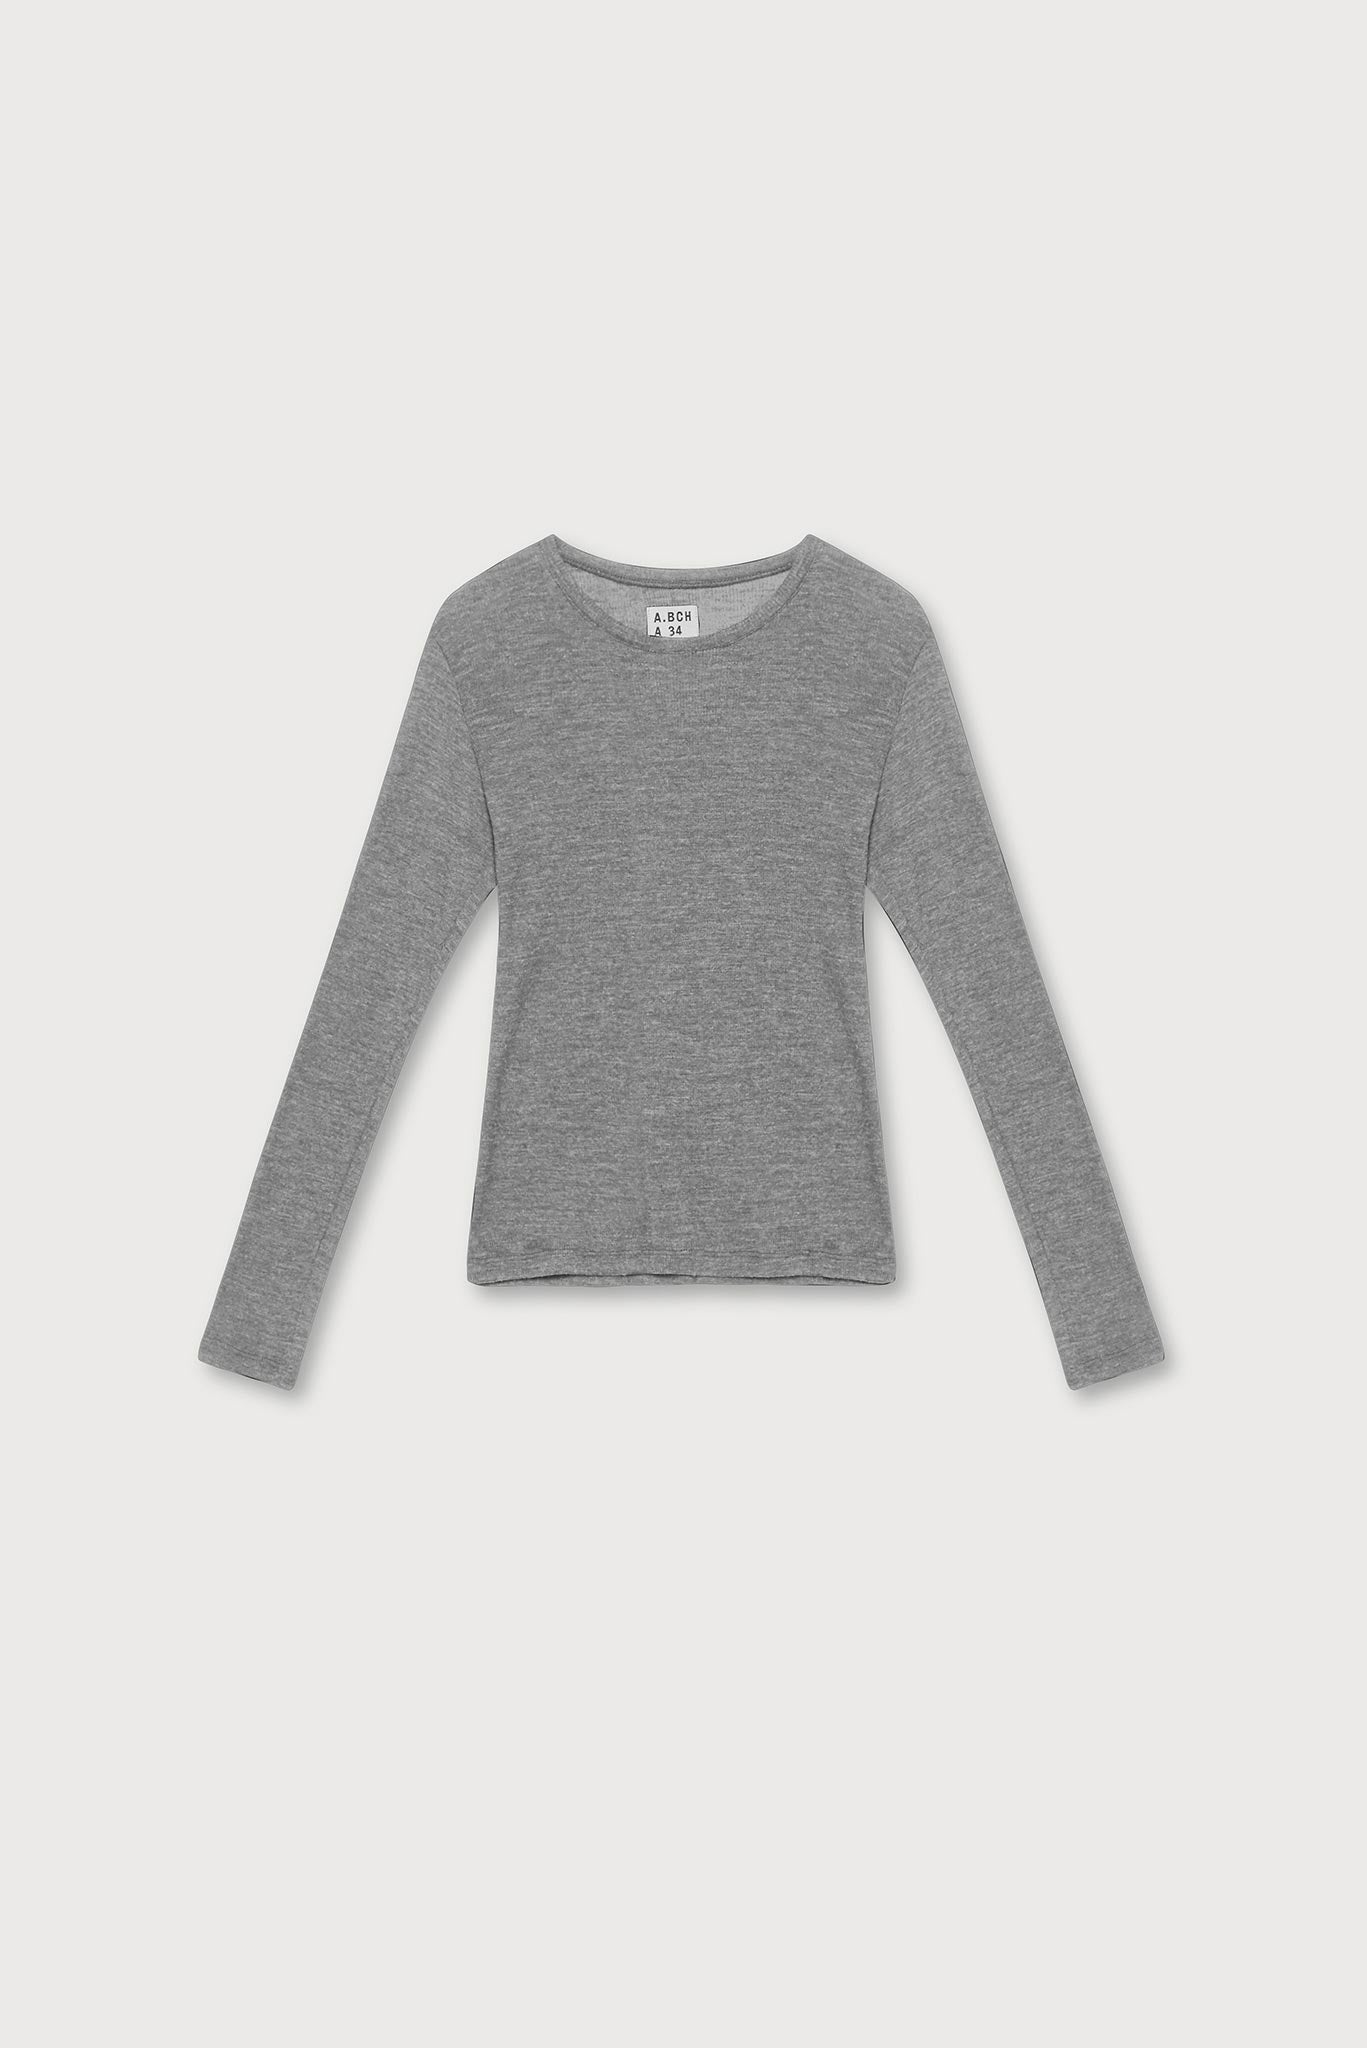 A.BCH A.34 Grey Marle Long Sleeve Thermal T-Shirt in Australian Merino